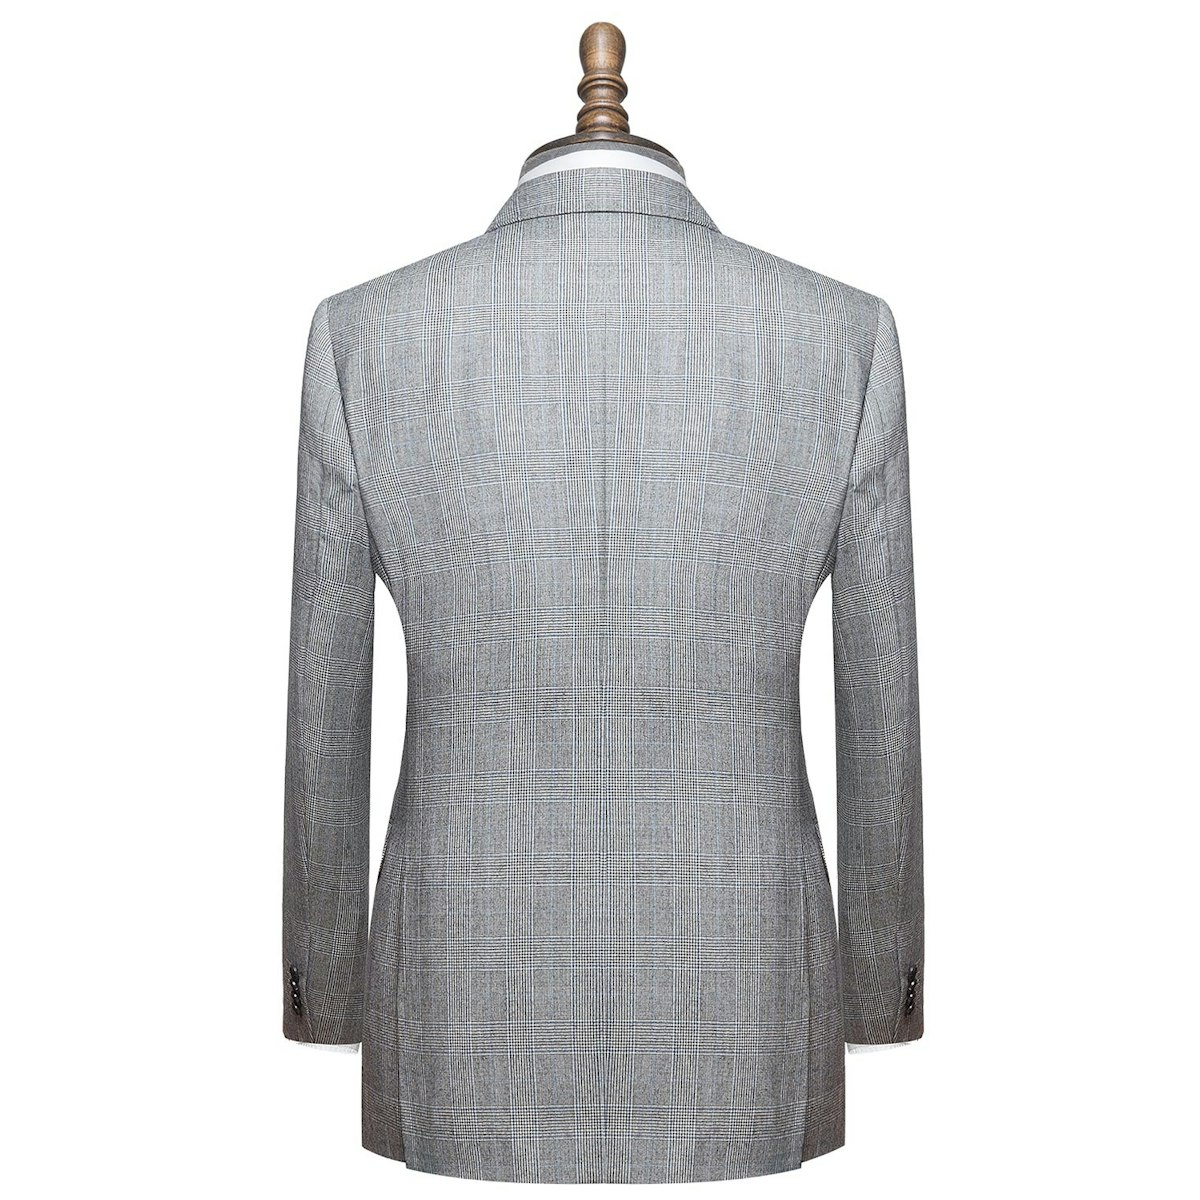 InStitchu Collection The Stafford mens suit